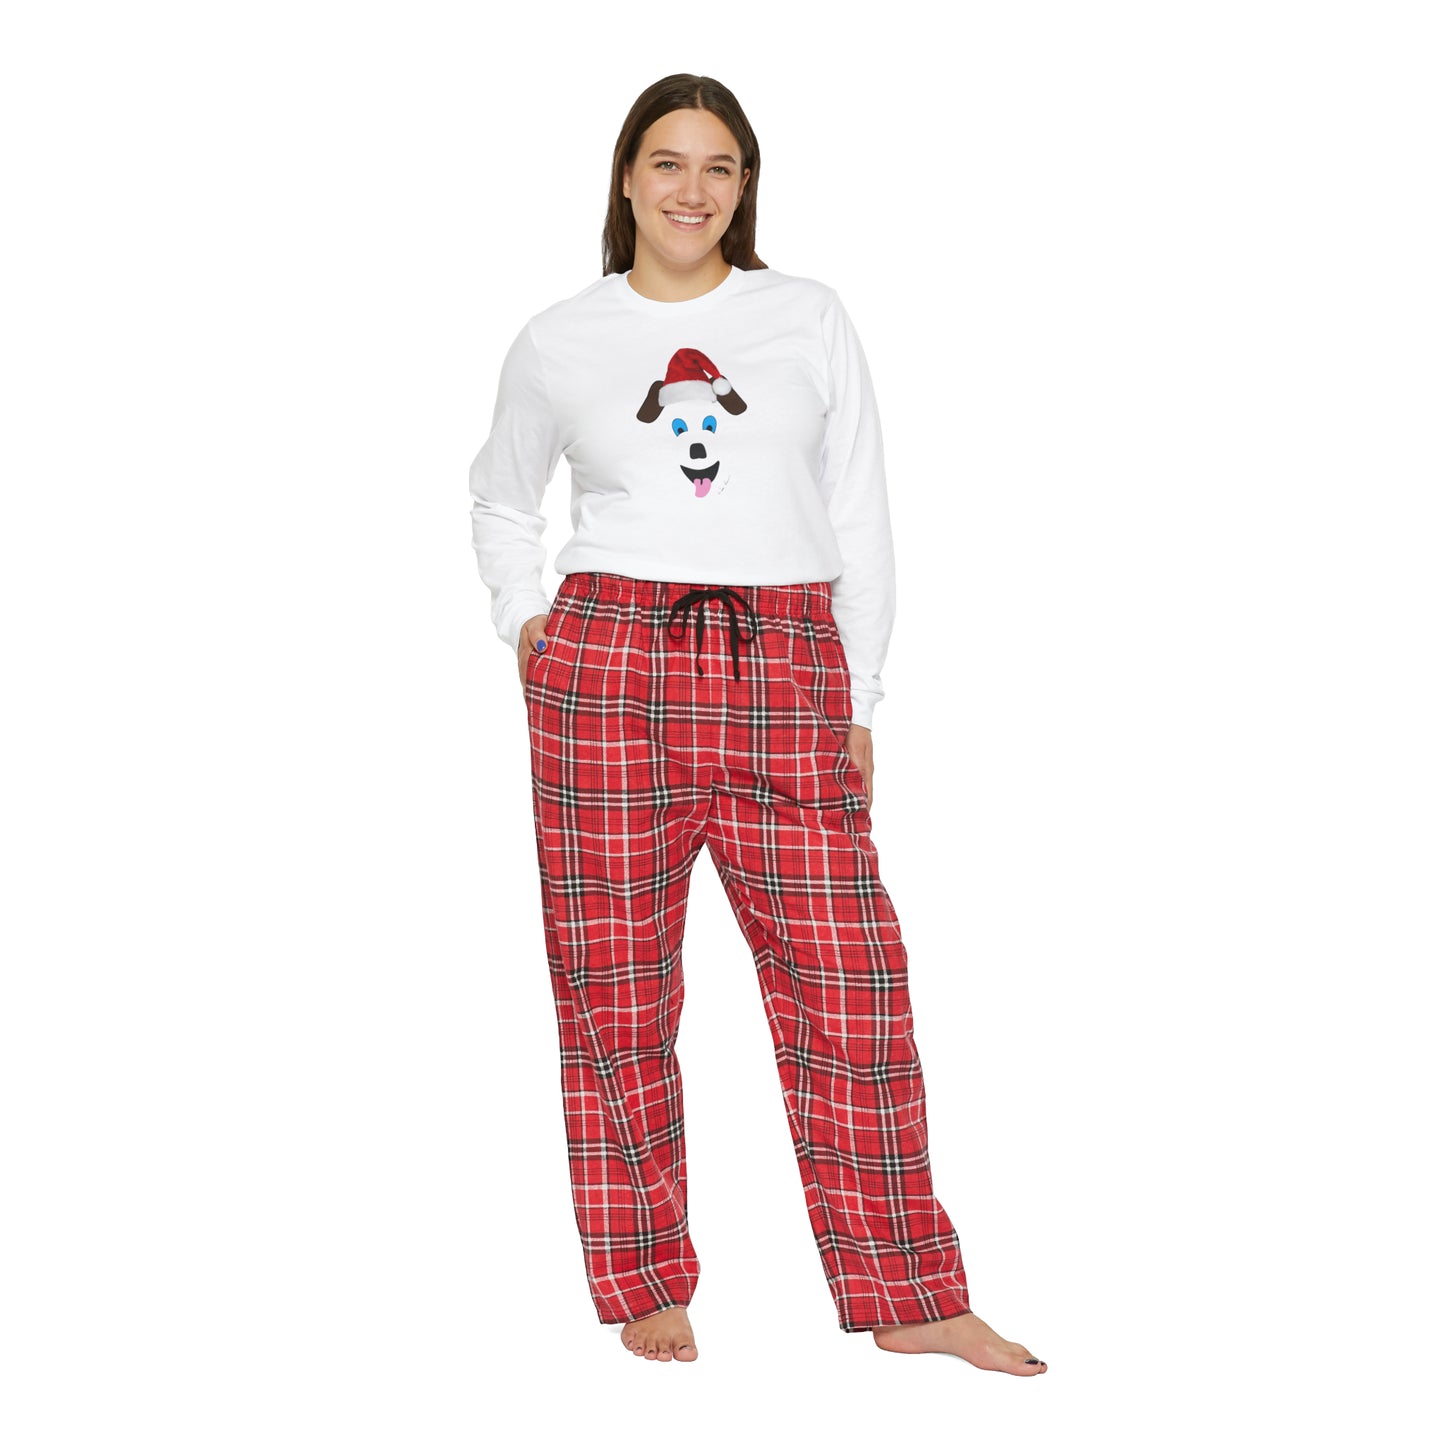 A woman wearing a Printify women's long-sleeve pajama set in red and white plaid with a dog on it, custom-made from 100% cotton.